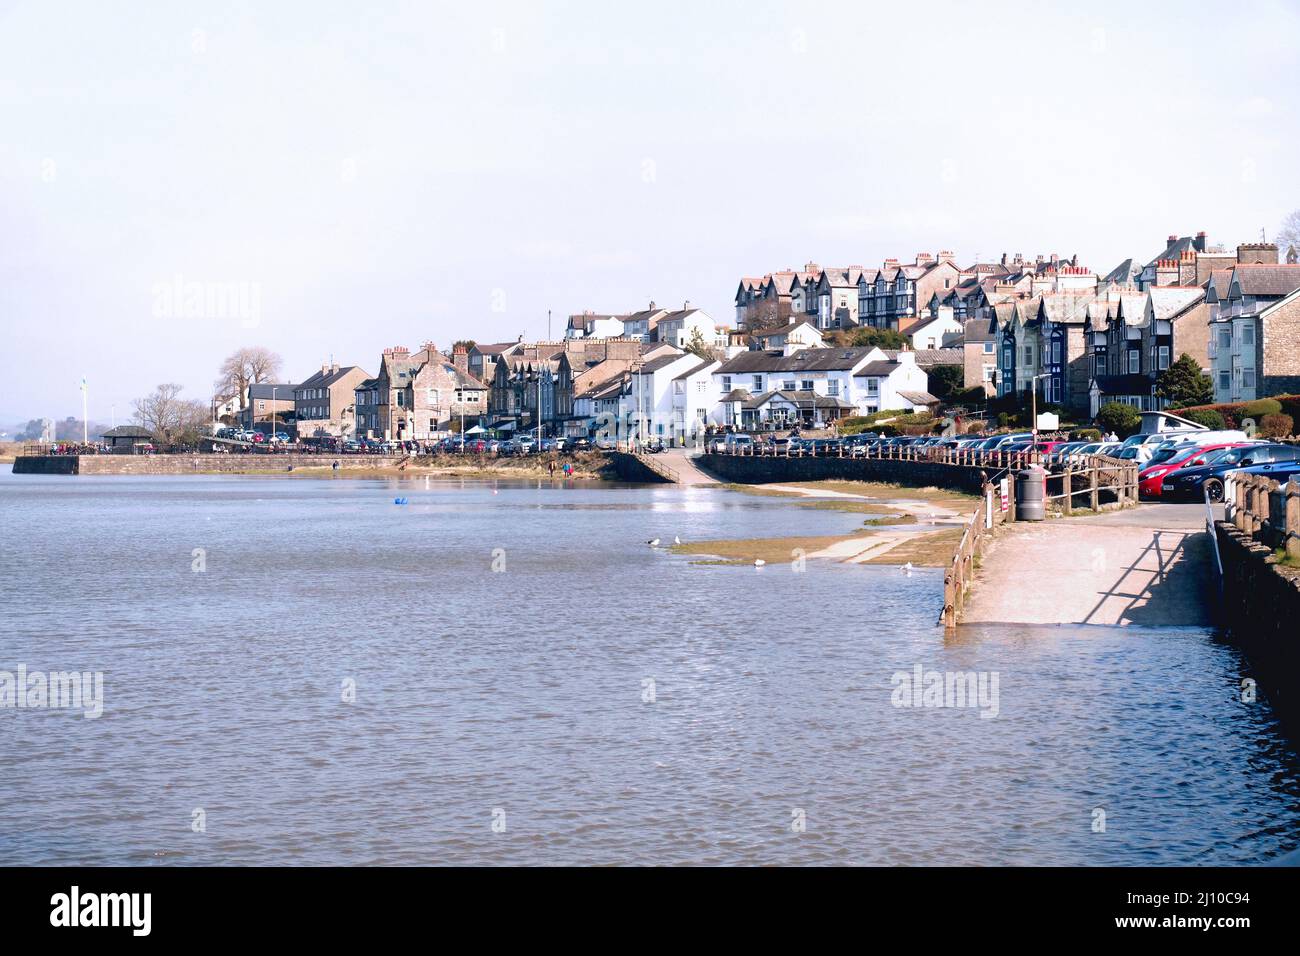 High tide at Arnside, Cumbria, on a bright early spring day Stock Photo